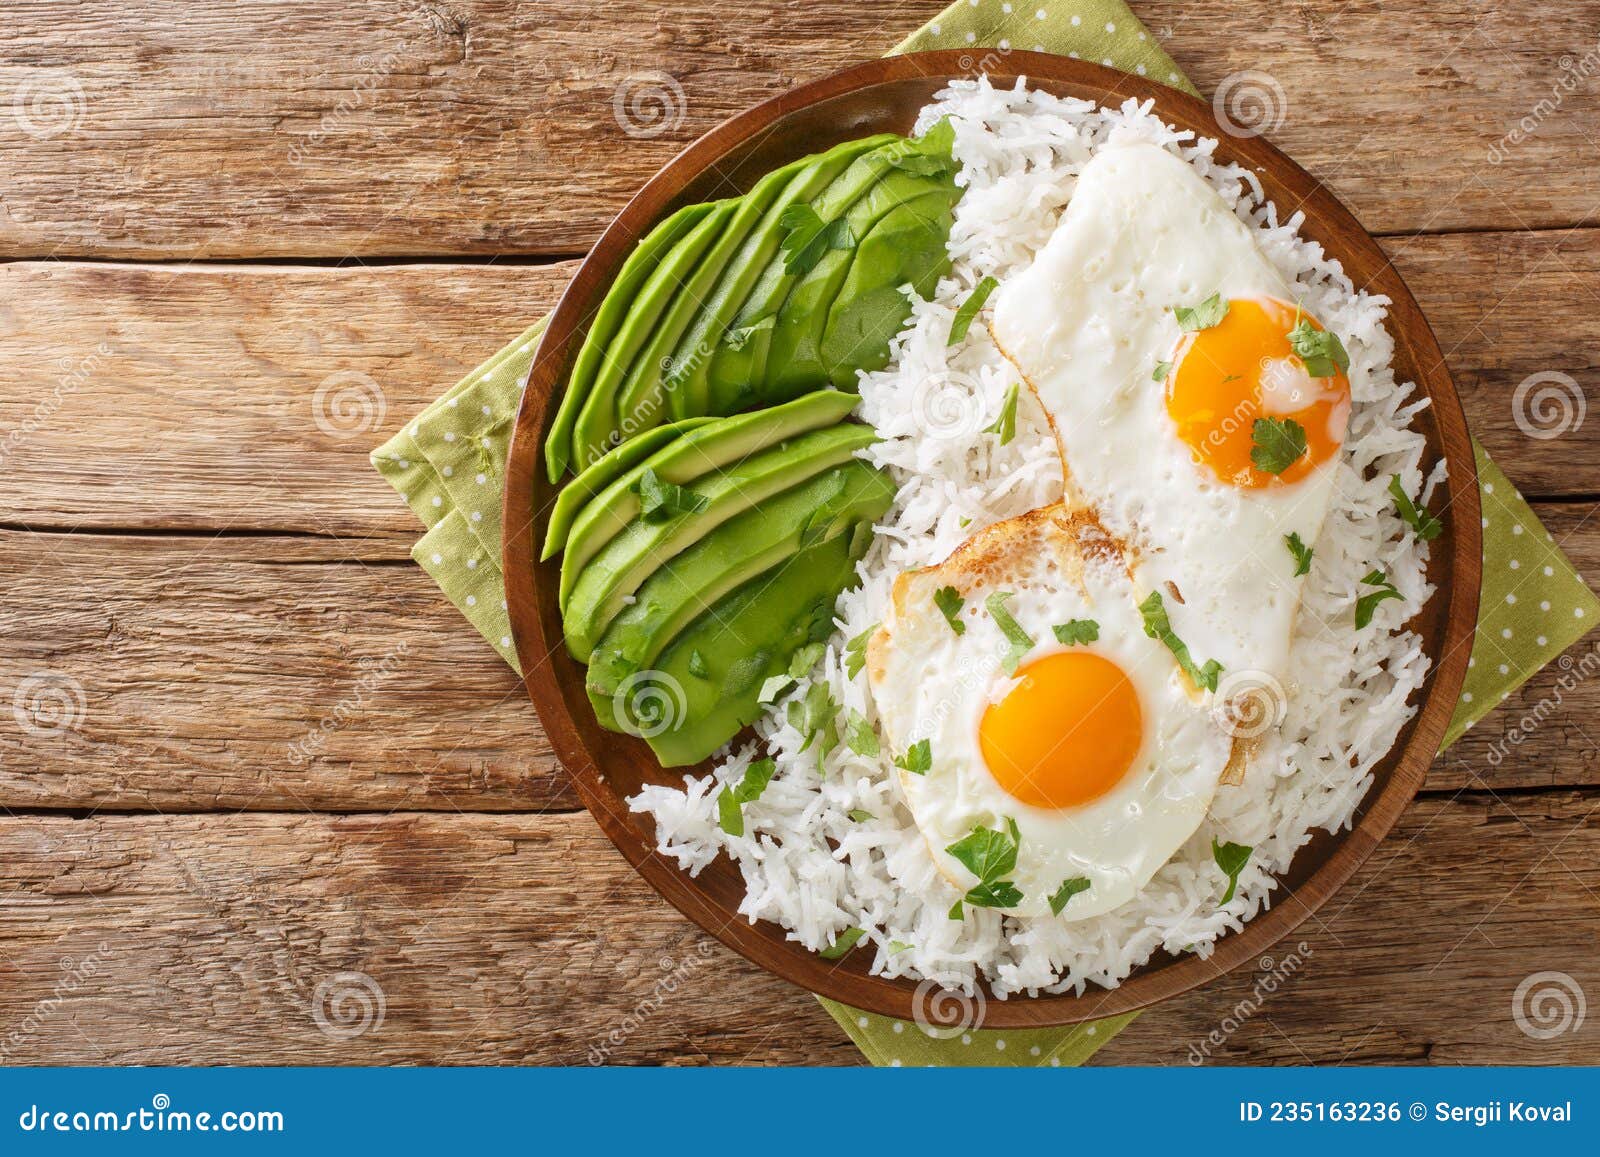 arroz con huevo frito is white rice and a fried egg close up in the plate. horizontal top view